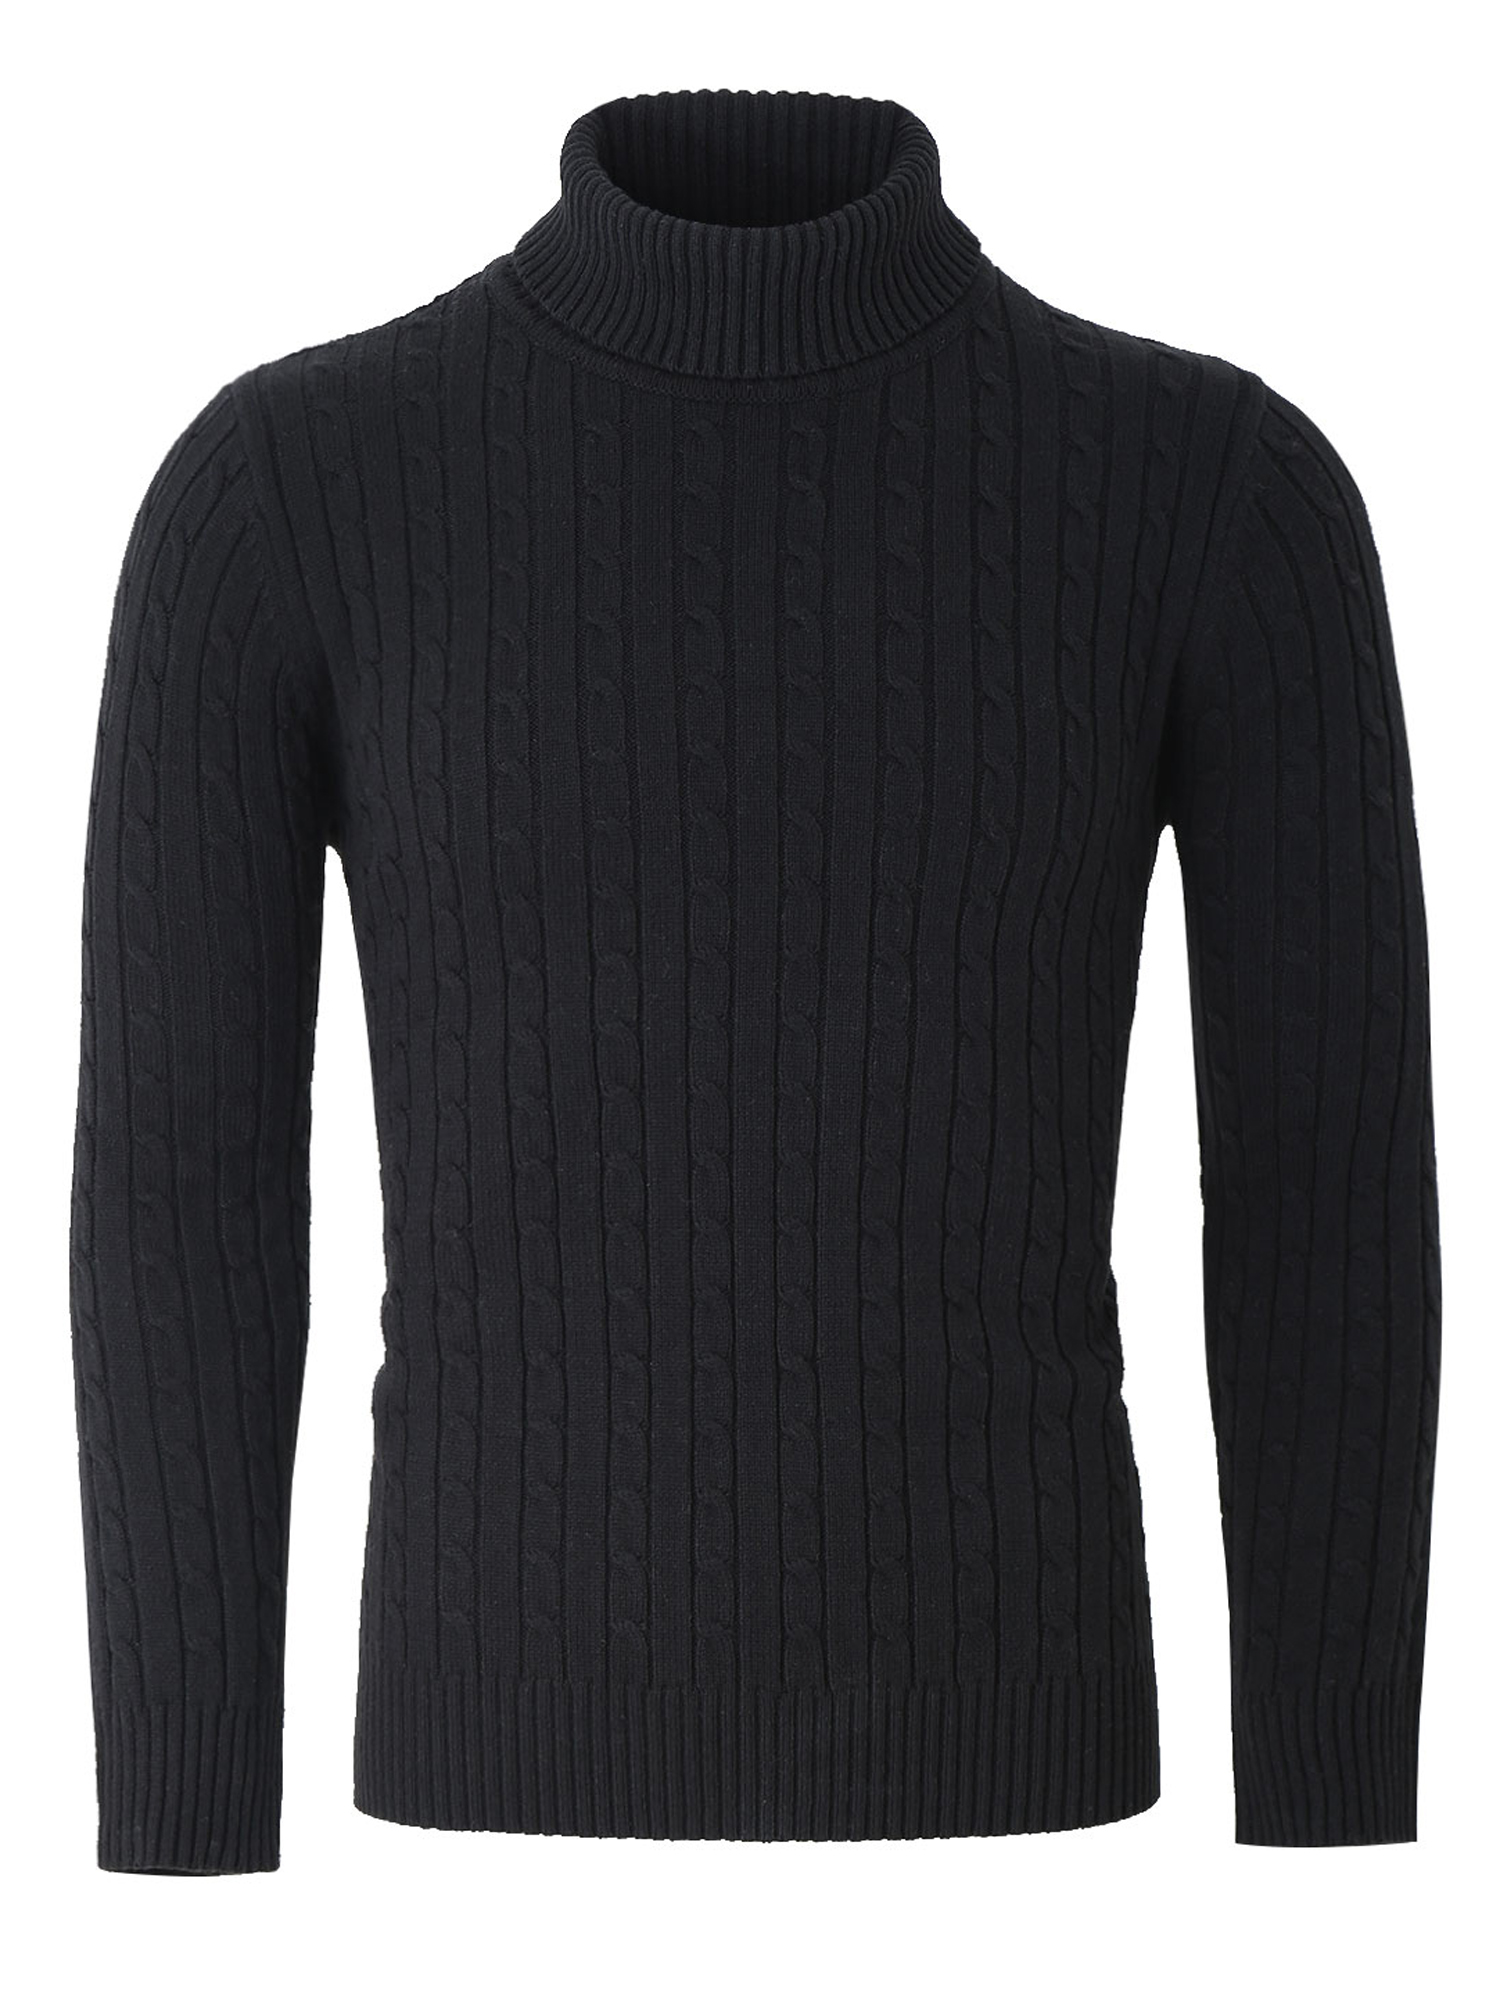 Men's Turtleneck Long Sleeves Pullover Cable Knit Sweater - image 2 of 7